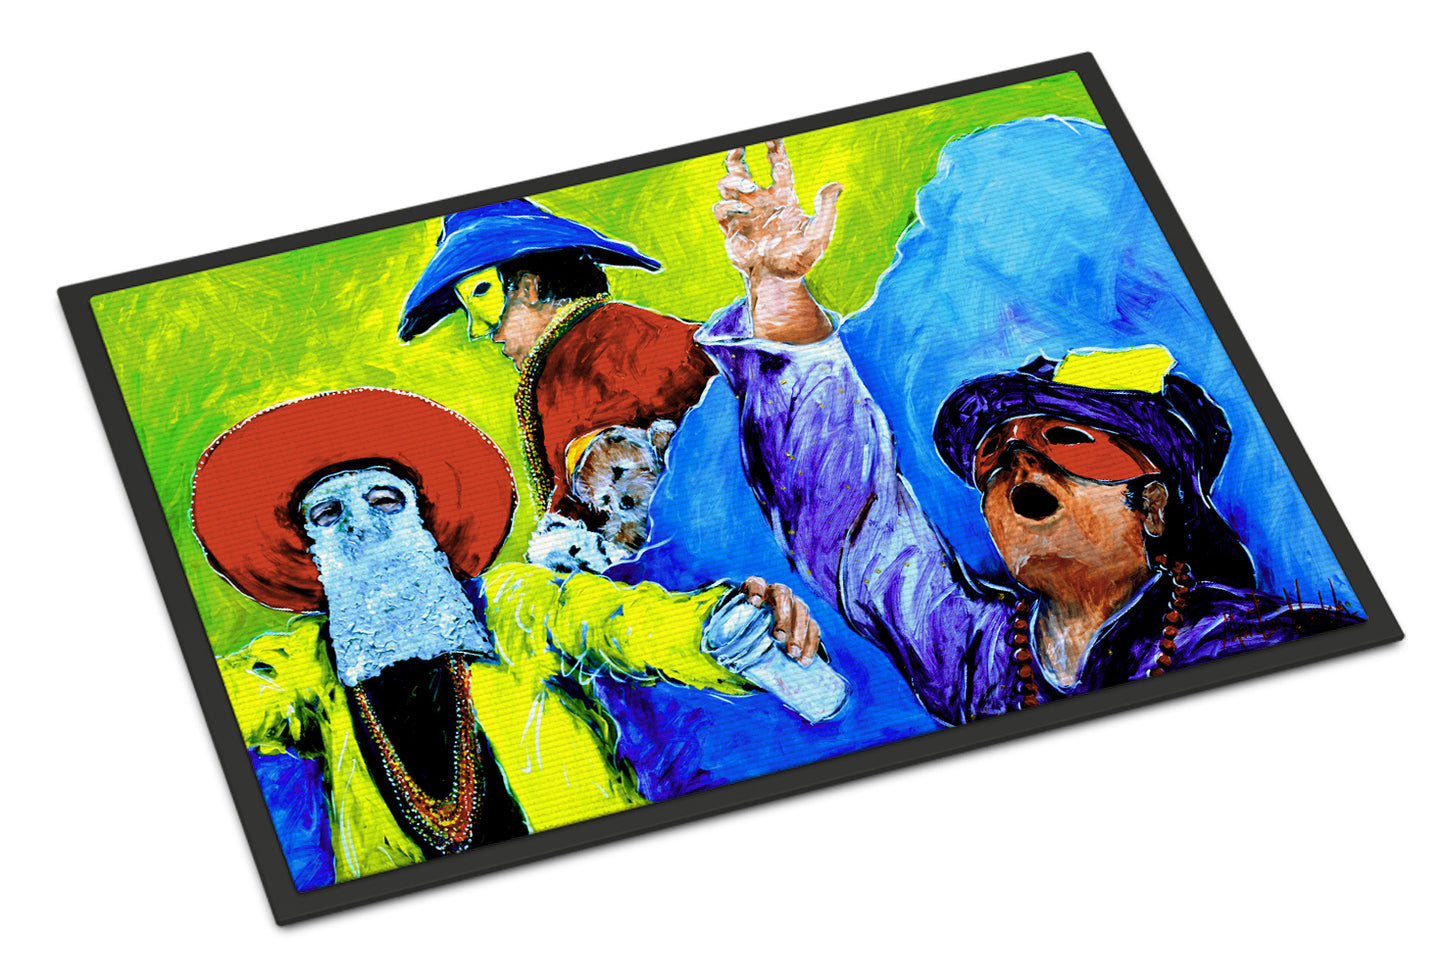 Buy this Mardi Gras Throw me something mister Indoor or Outdoor Mat 18x27